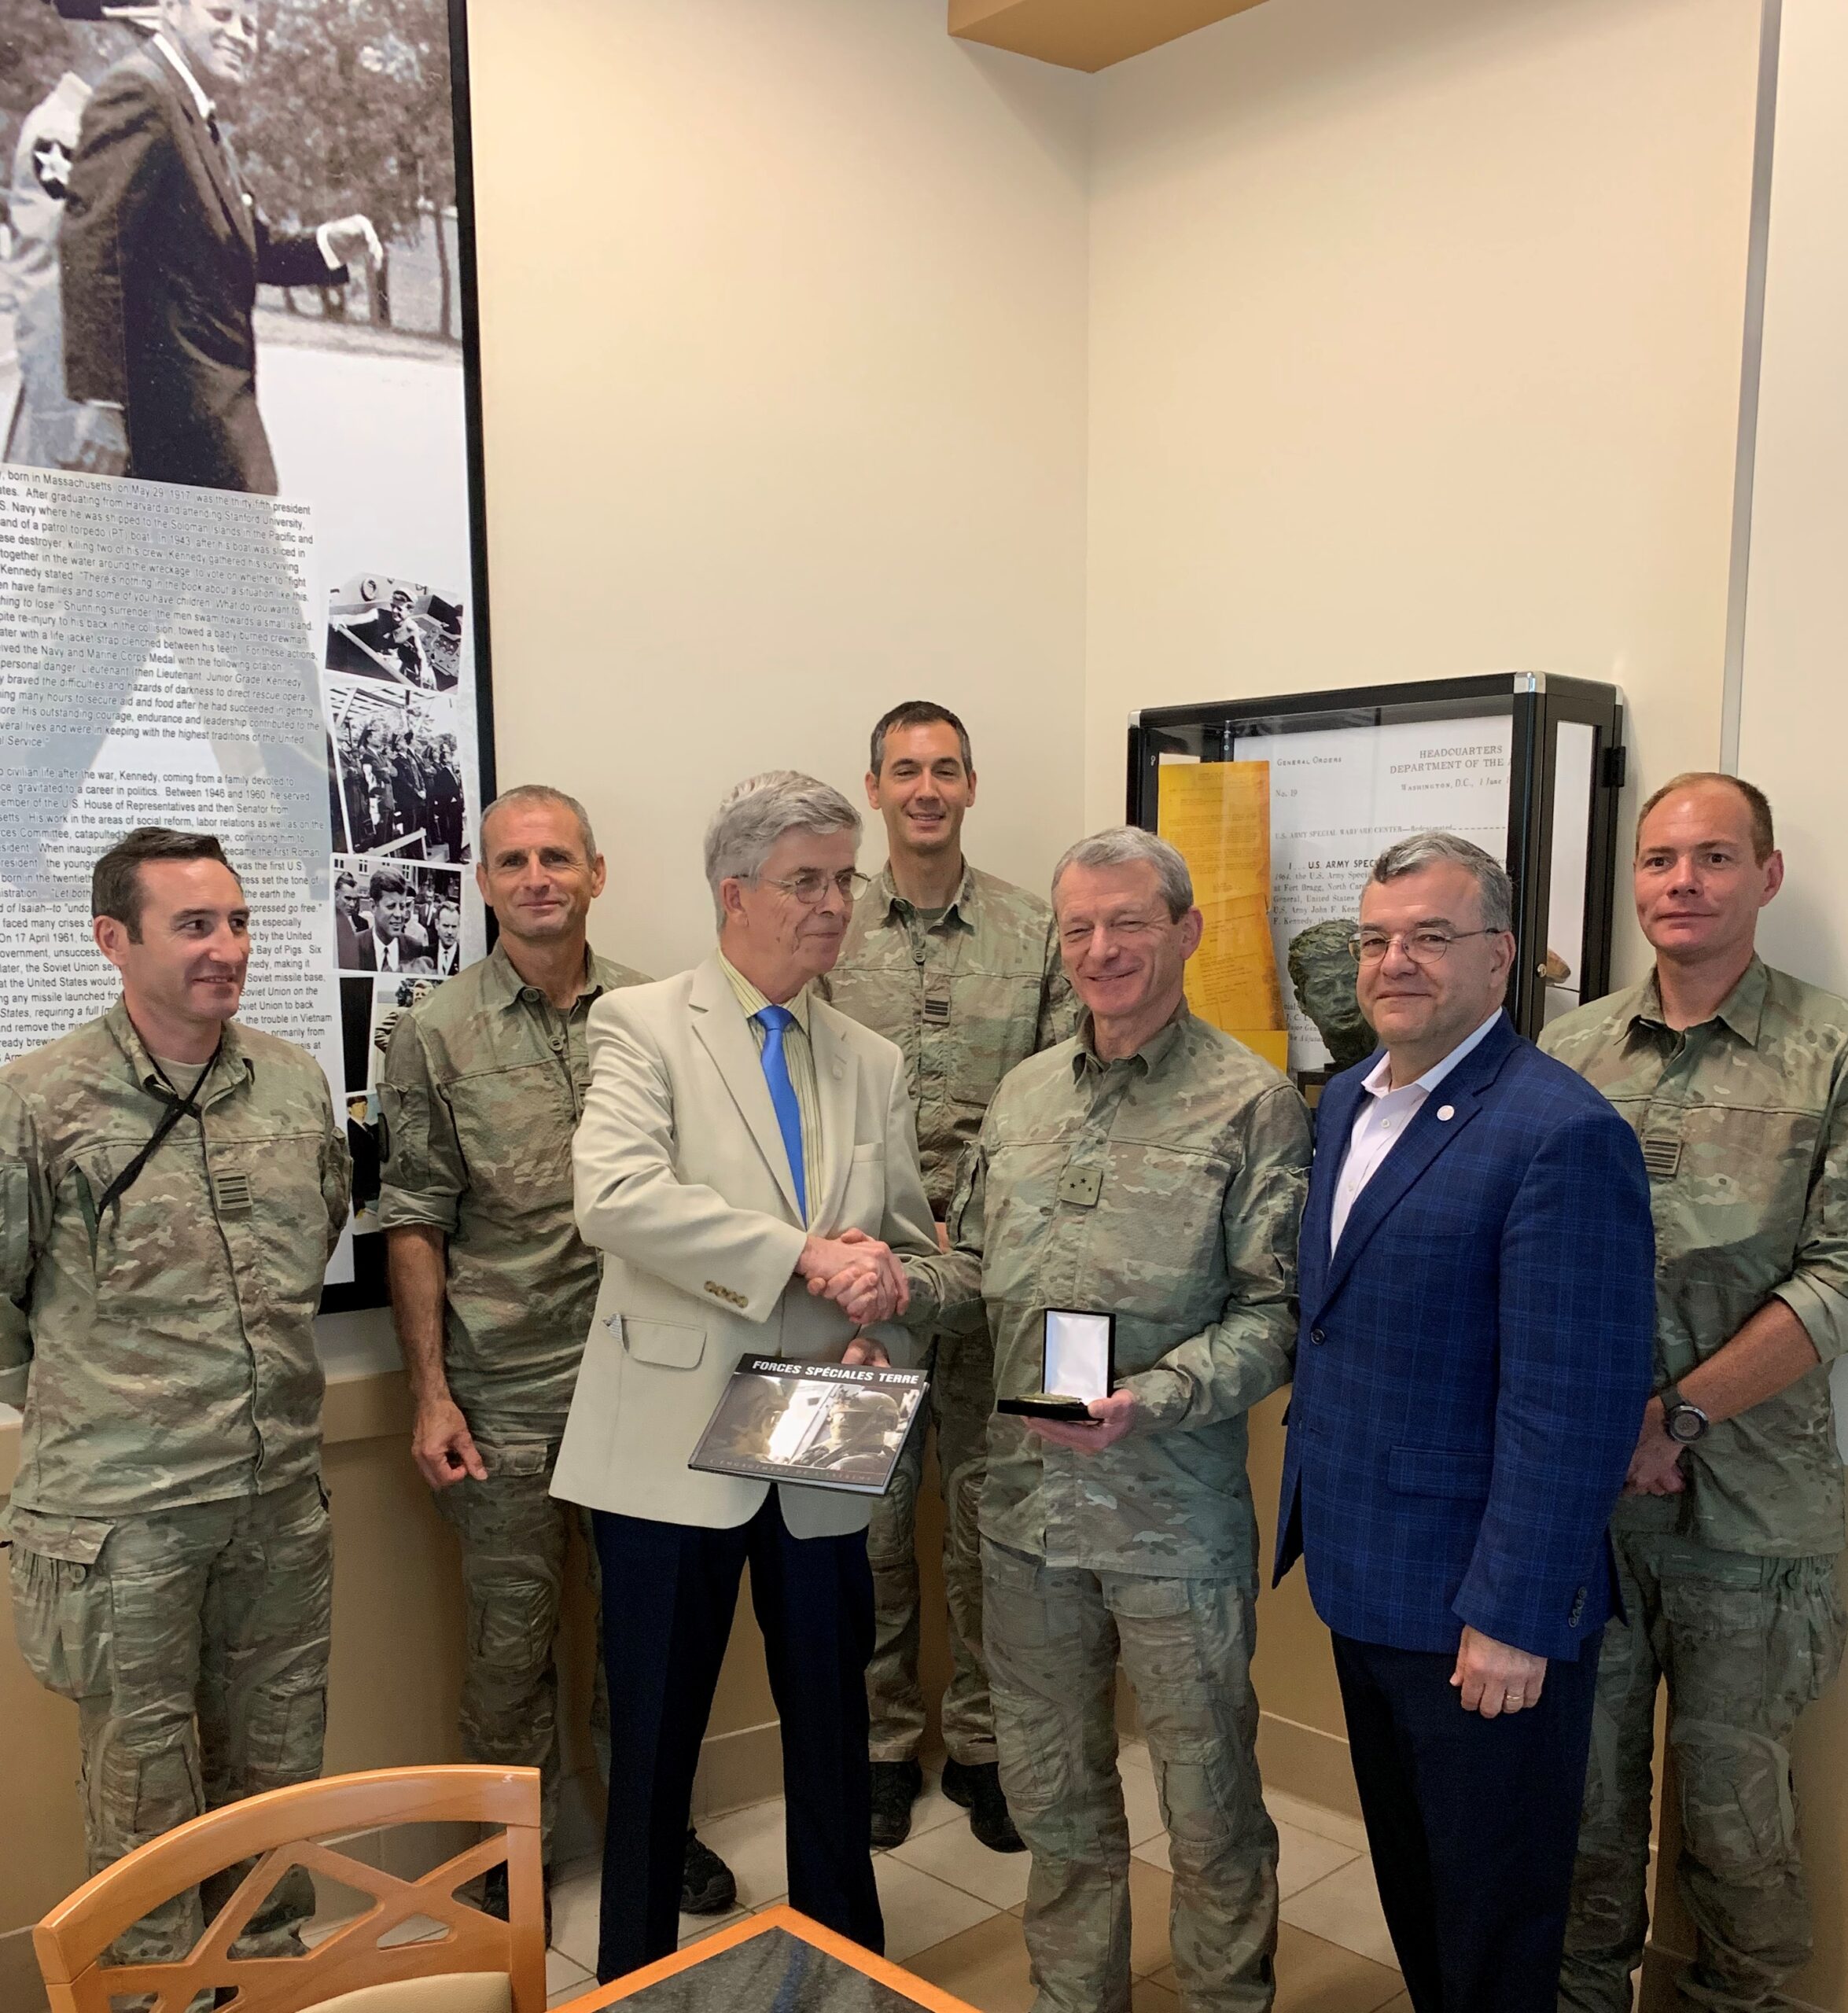 A photo of a group of men, some in suits and some in army uniforms, with two of them shaking hands. In 2019 Members of the Lafayette Society attended a lunch at Ft Bragg with General Thierry Ducret, commander of the French special forces.